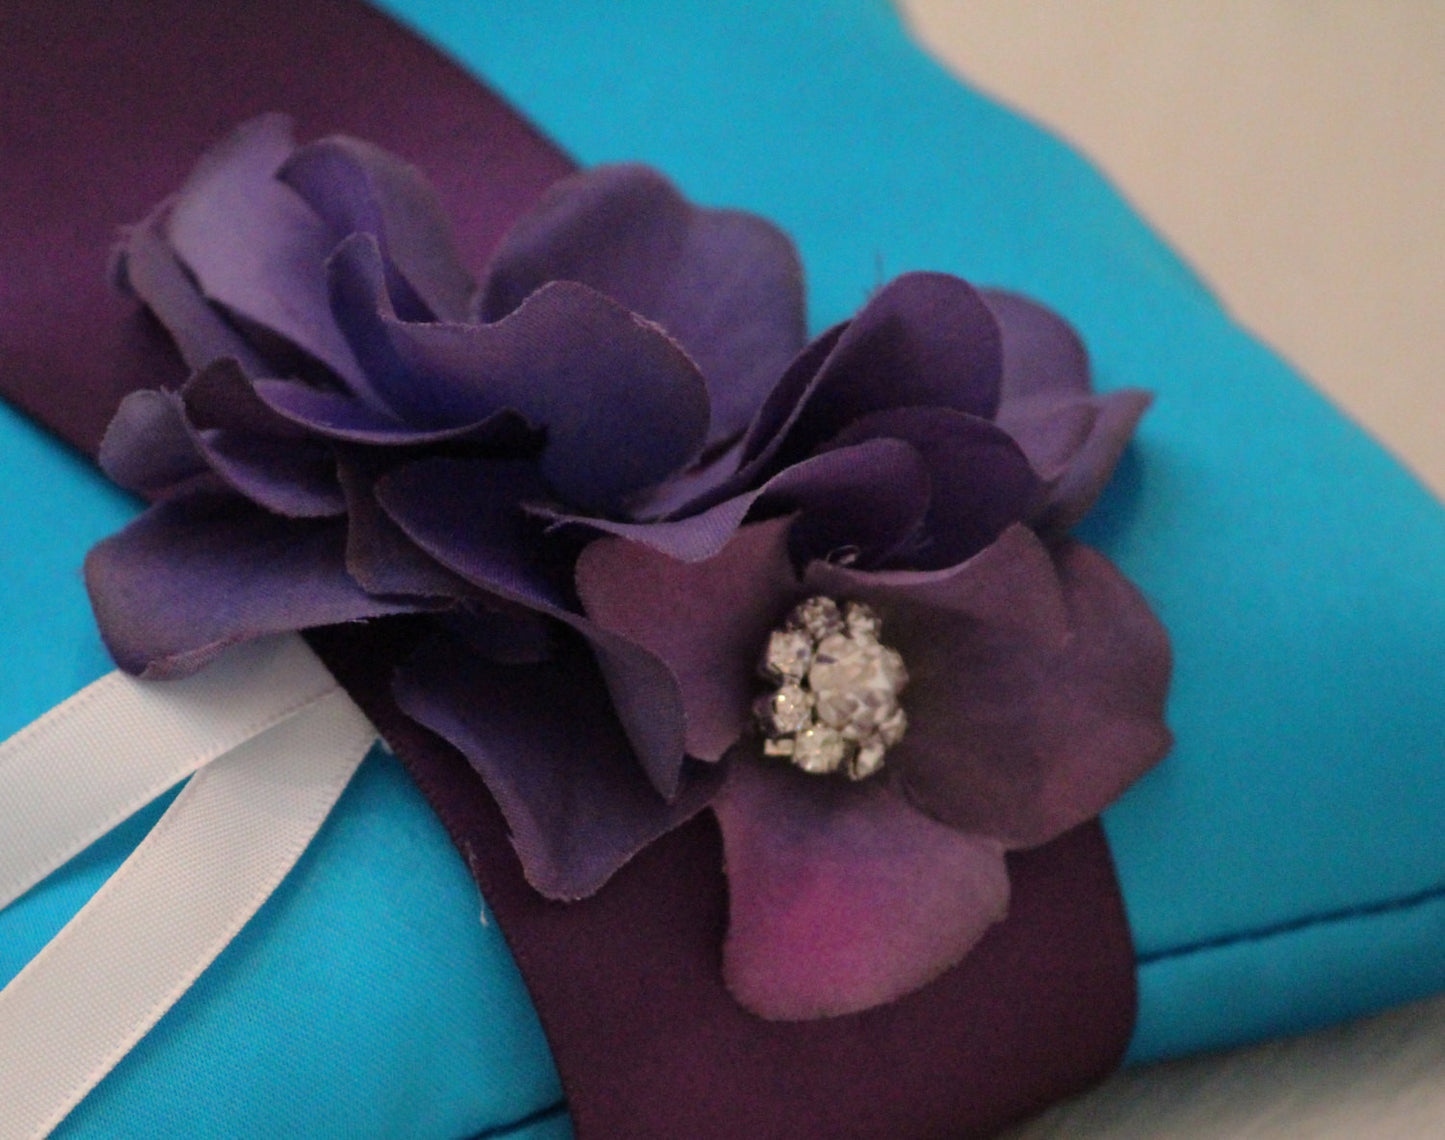 Turquoise Pillow Wedding Ring for Dogs, Purple Flower with Rhienstone, Bearer , Wedding dog collar